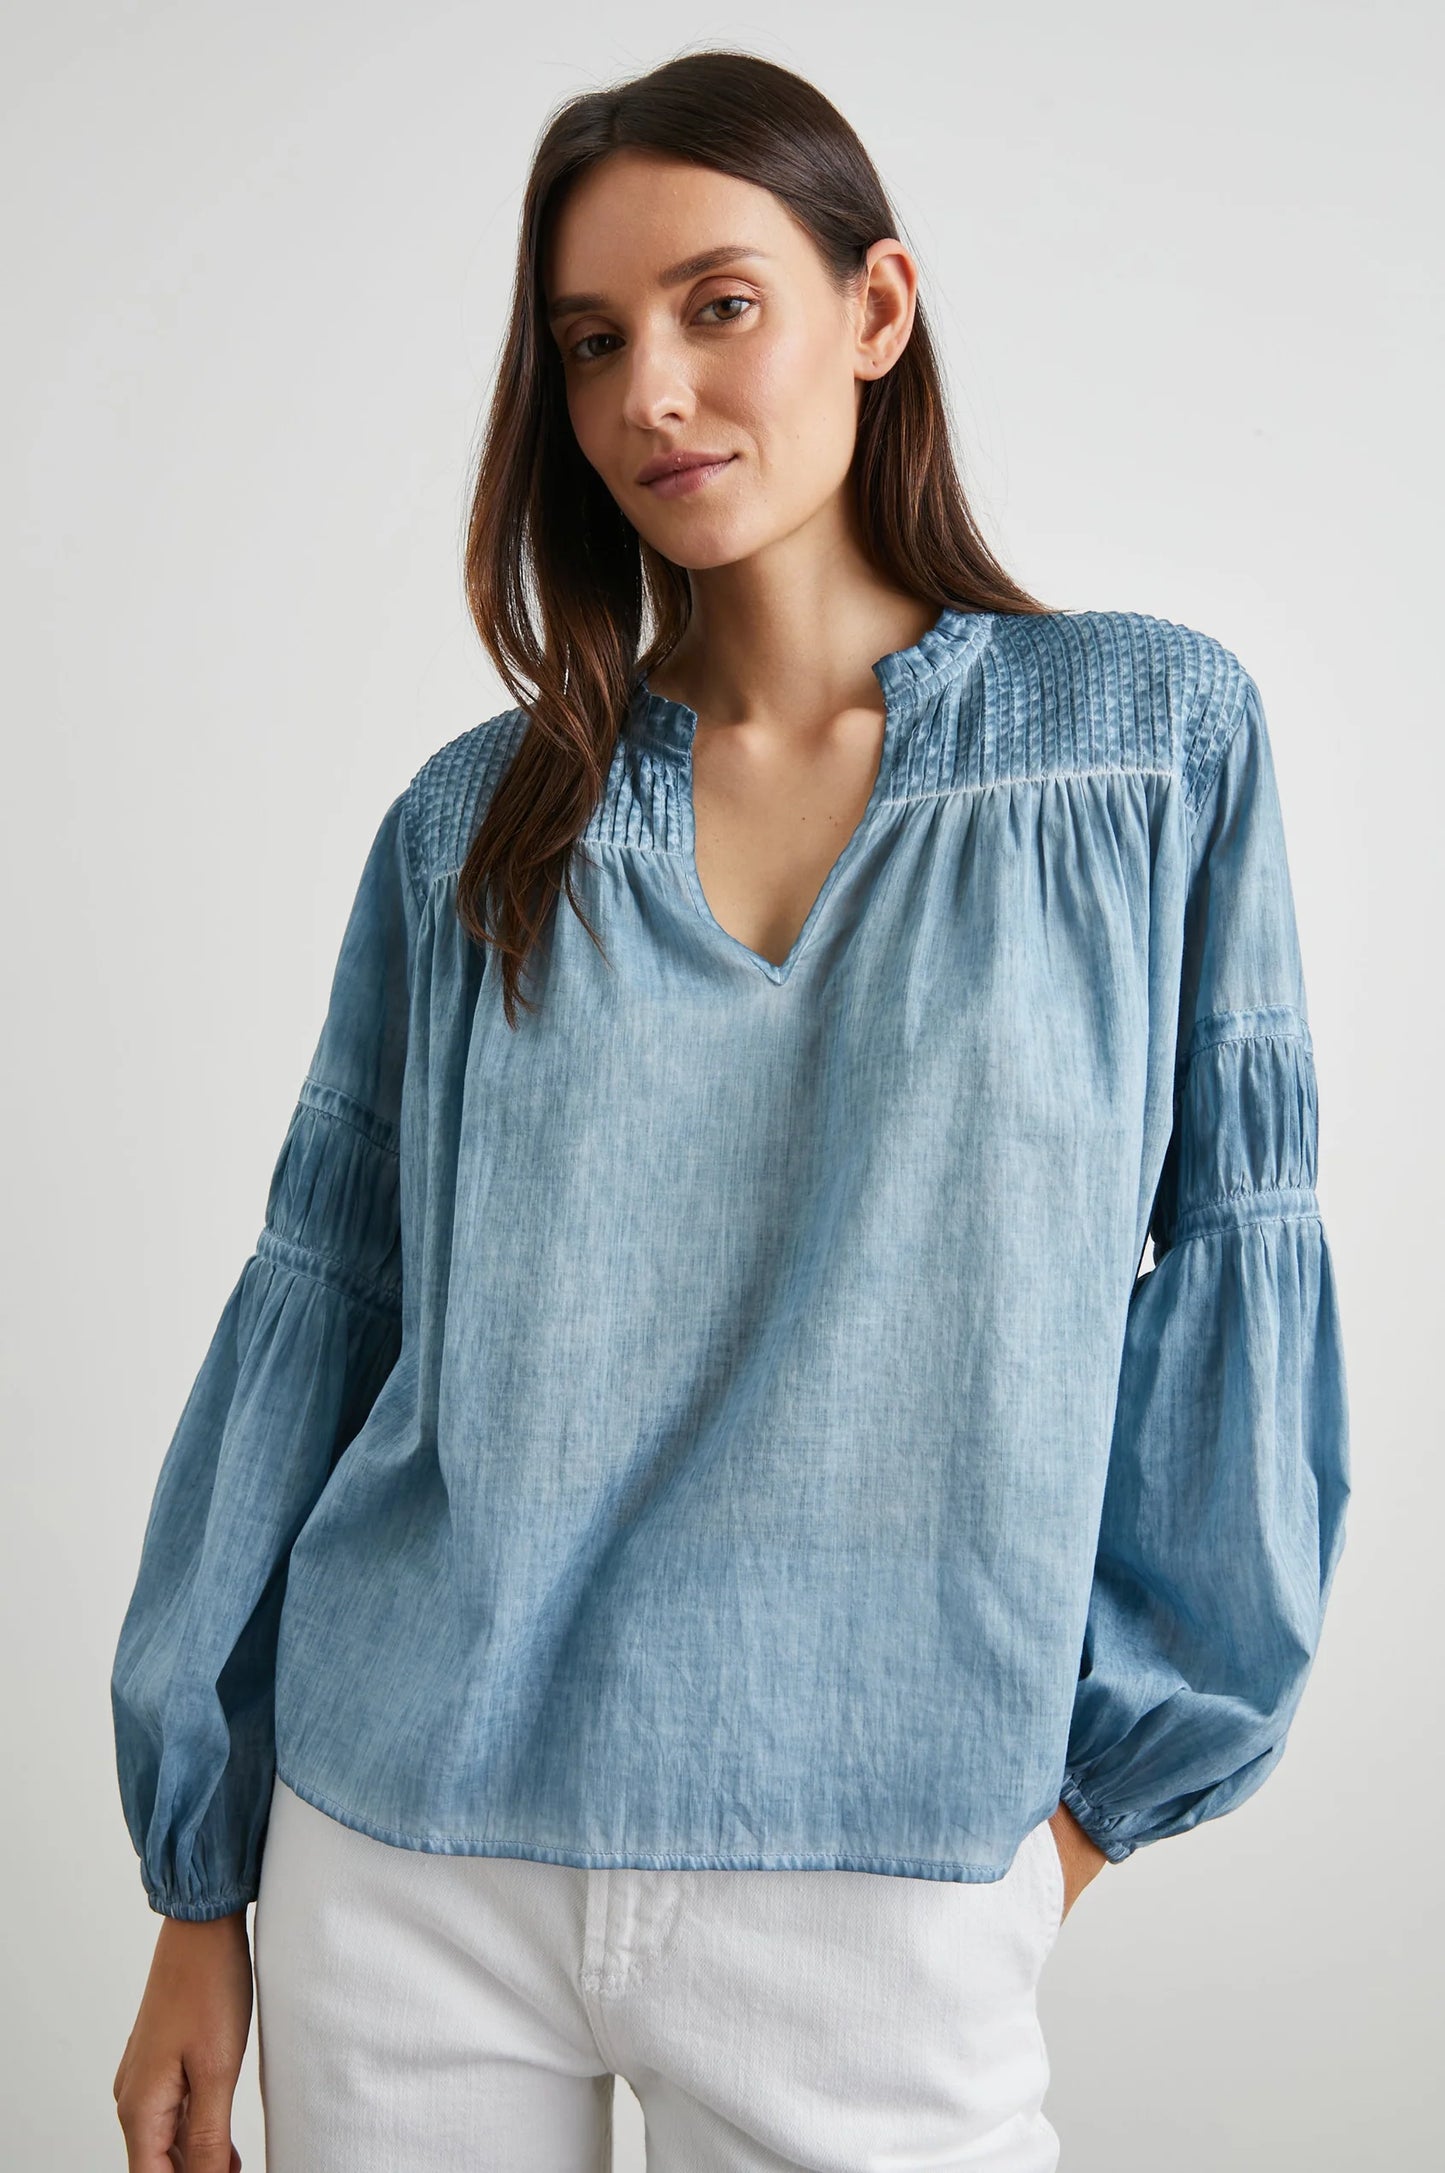 Marli Top in Faded Blue by Rails